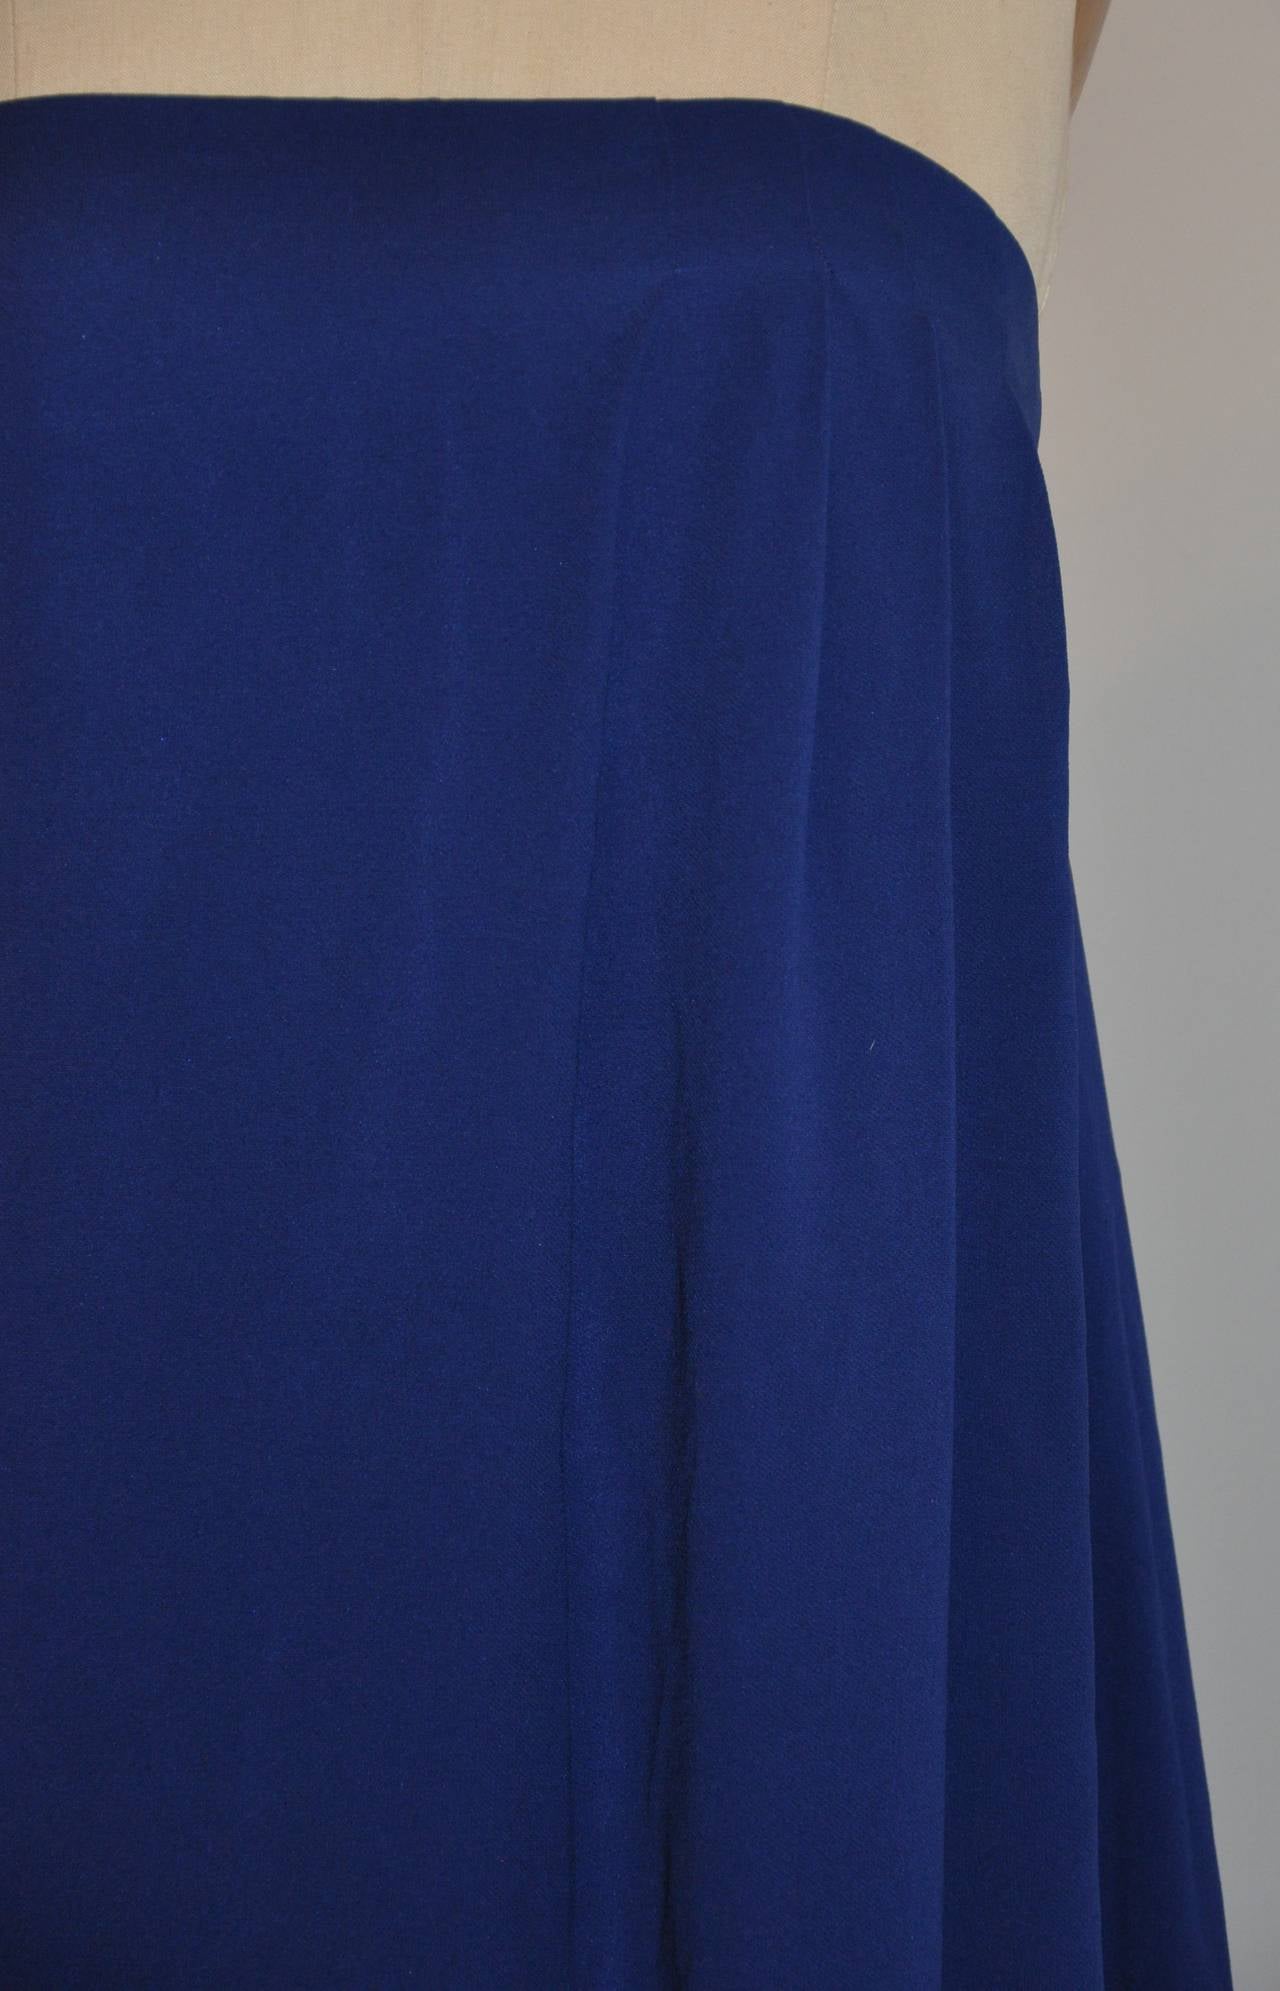 This wonderfully elegant Jil Sander strapless cocktail dress in bold blue is enforced with an interior black elestaic band with hook and eye to help with the fit and appearance of this wonderful dress. The length ranges from 36 1/2